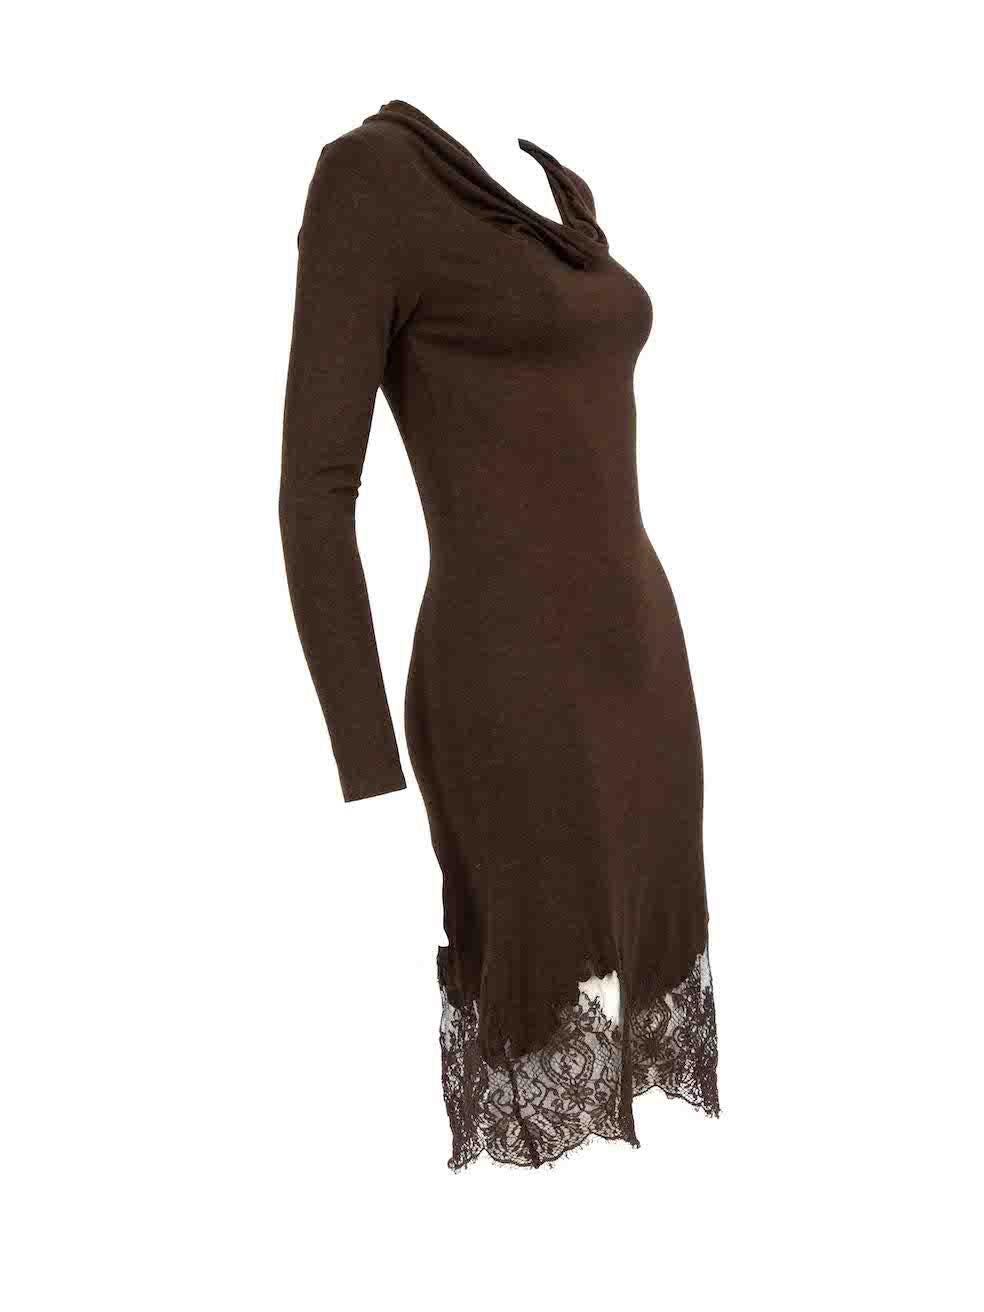 CONDITION is Very good. Hardly any visible wear to dress is evident on this used Red Valentino designer resale item.
 
 
 
 Details
 
 
 Brown
 
 Viscose
 
 Knit dress
 
 Cowl neck
 
 Stretchy
 
 Long sleeves
 
 Midi
 
 Lace skirt trim
 
 
 
 
 
